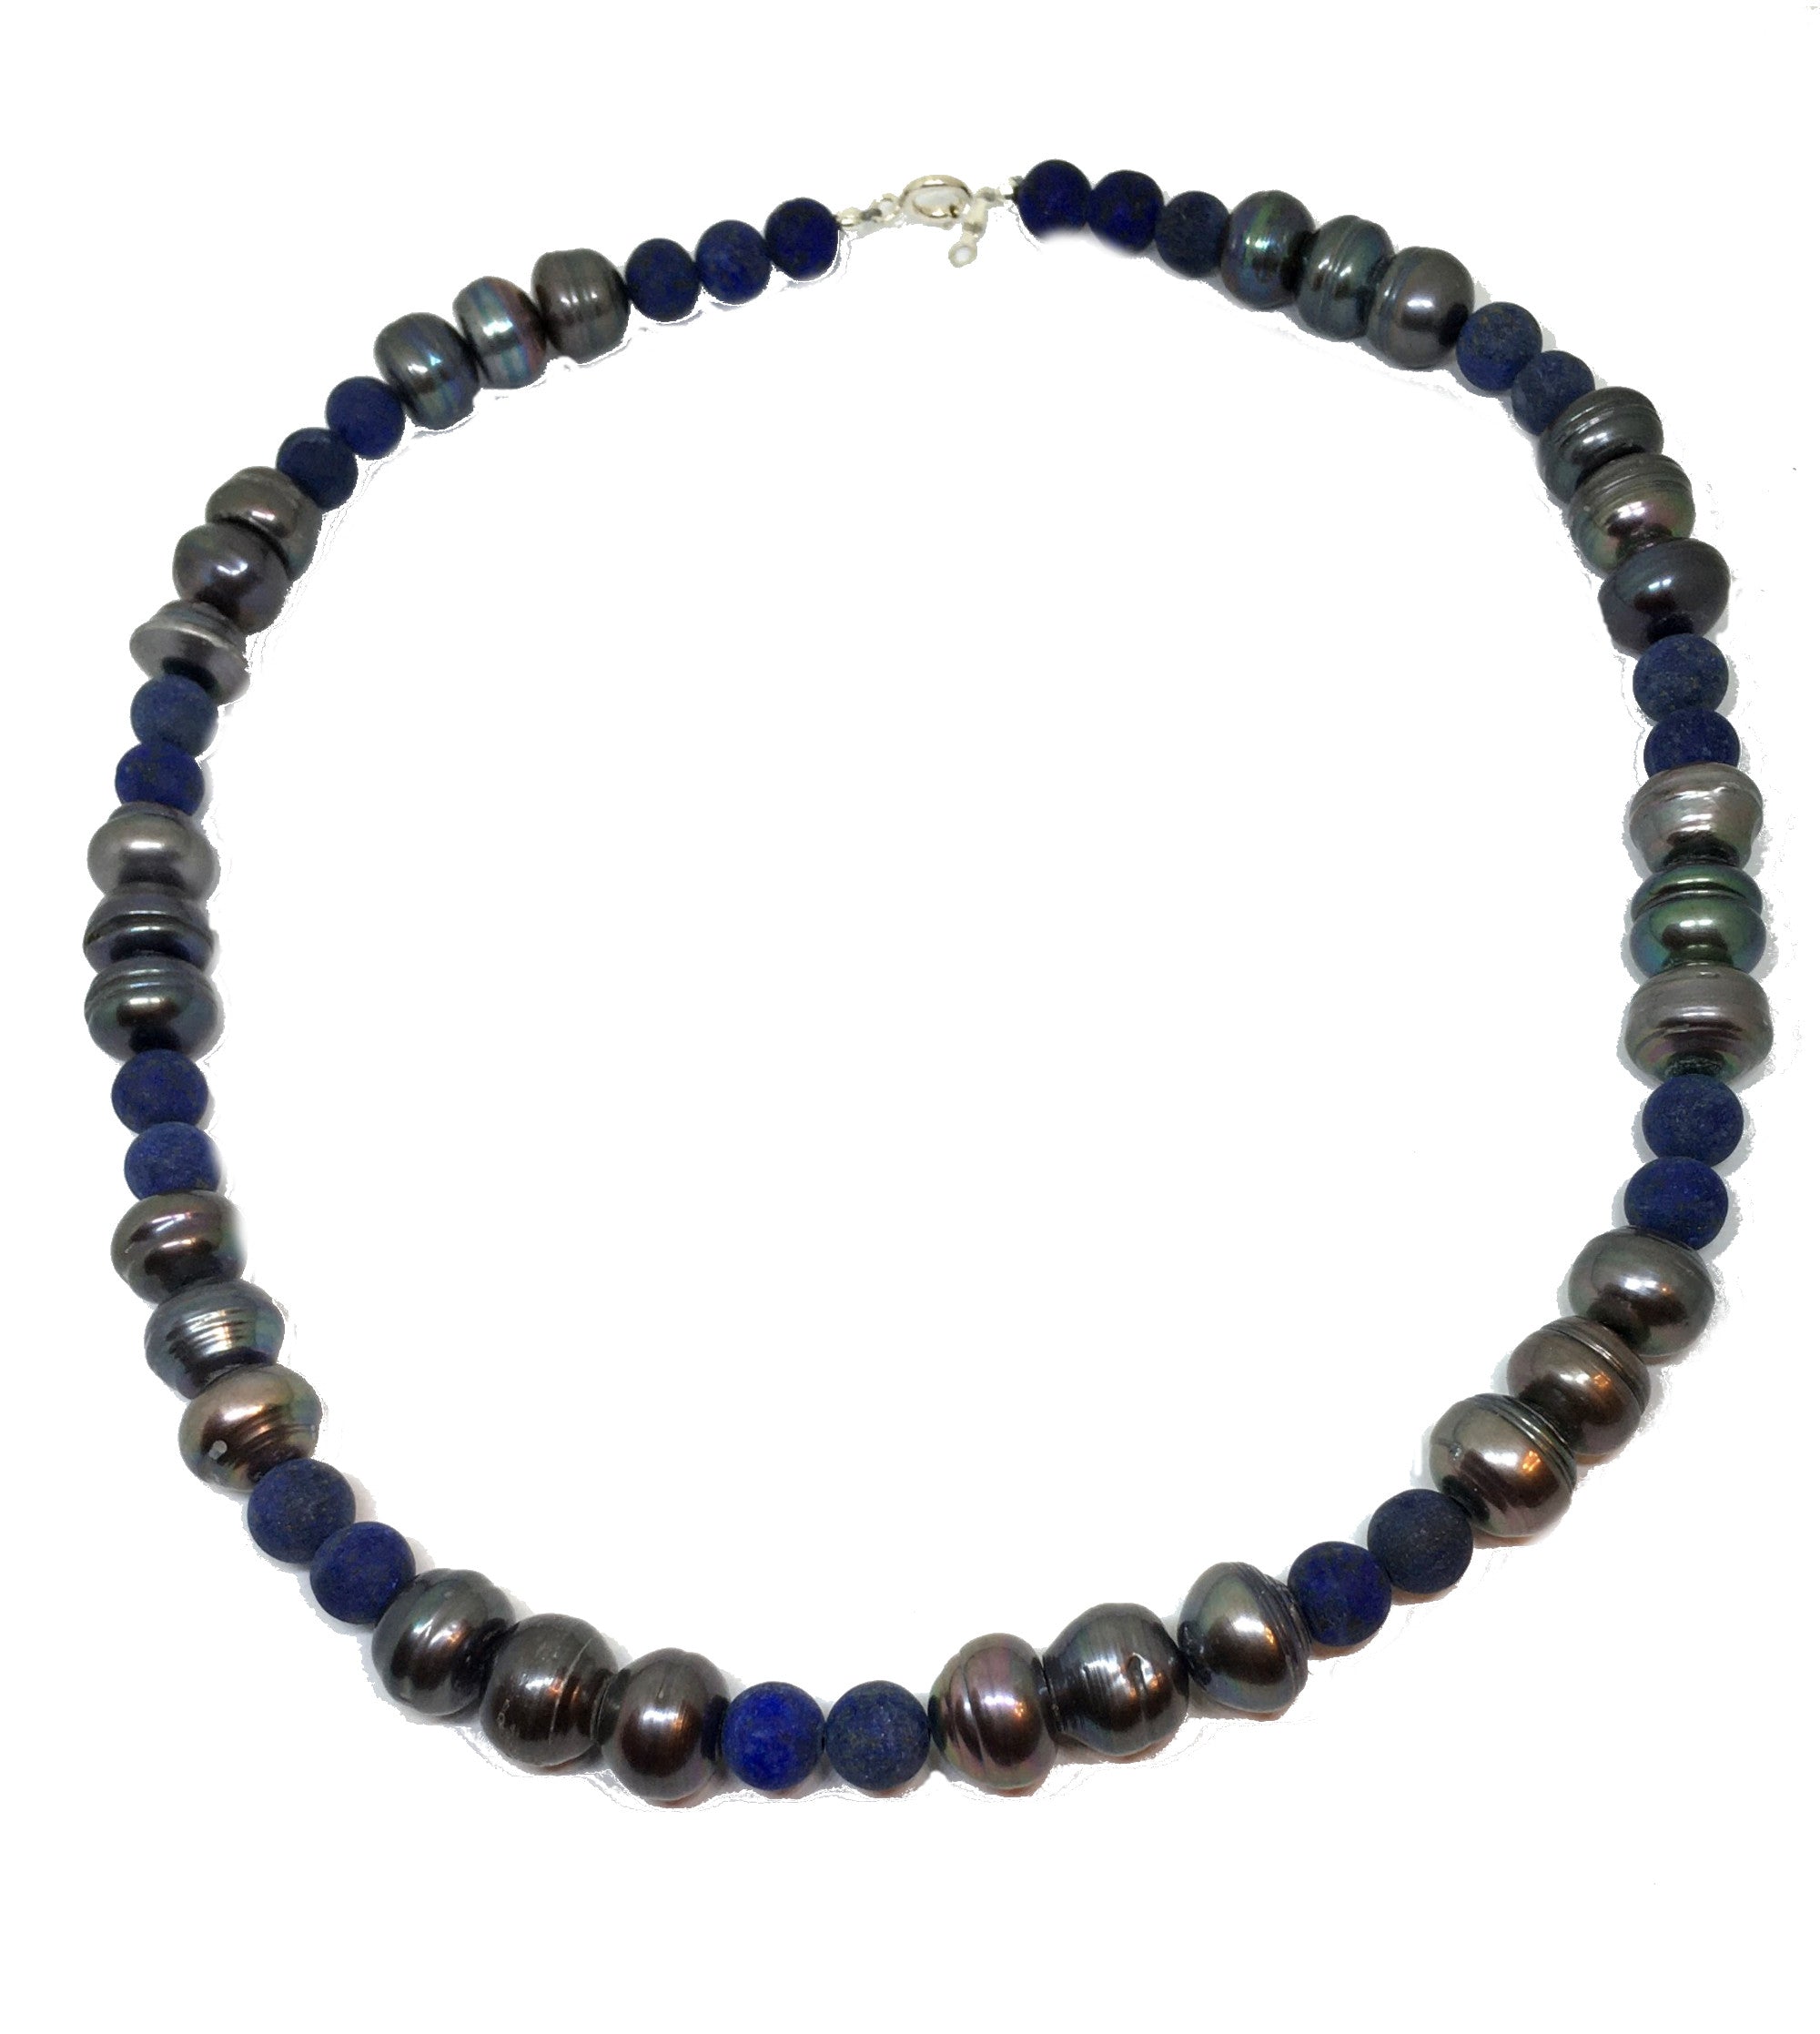 Baroque Peacock Pearl and Lapis Lazuli Necklace